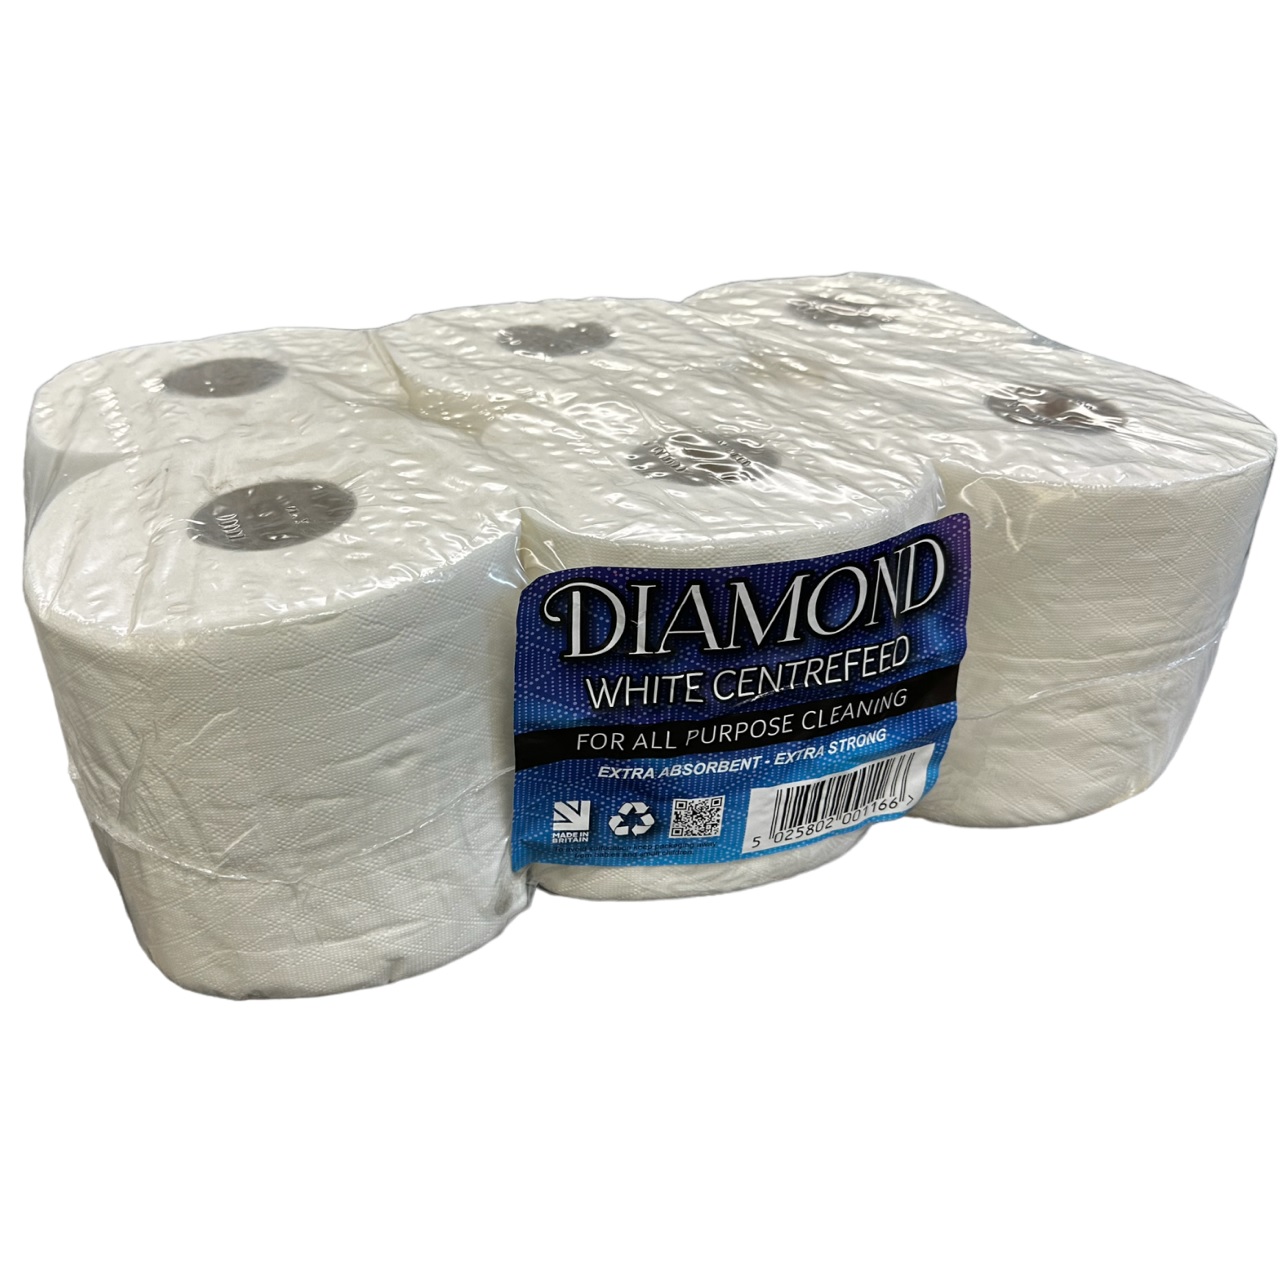 Diamond-Pure-White-Centrefeed-166mm-x-55m--pack-of-6-